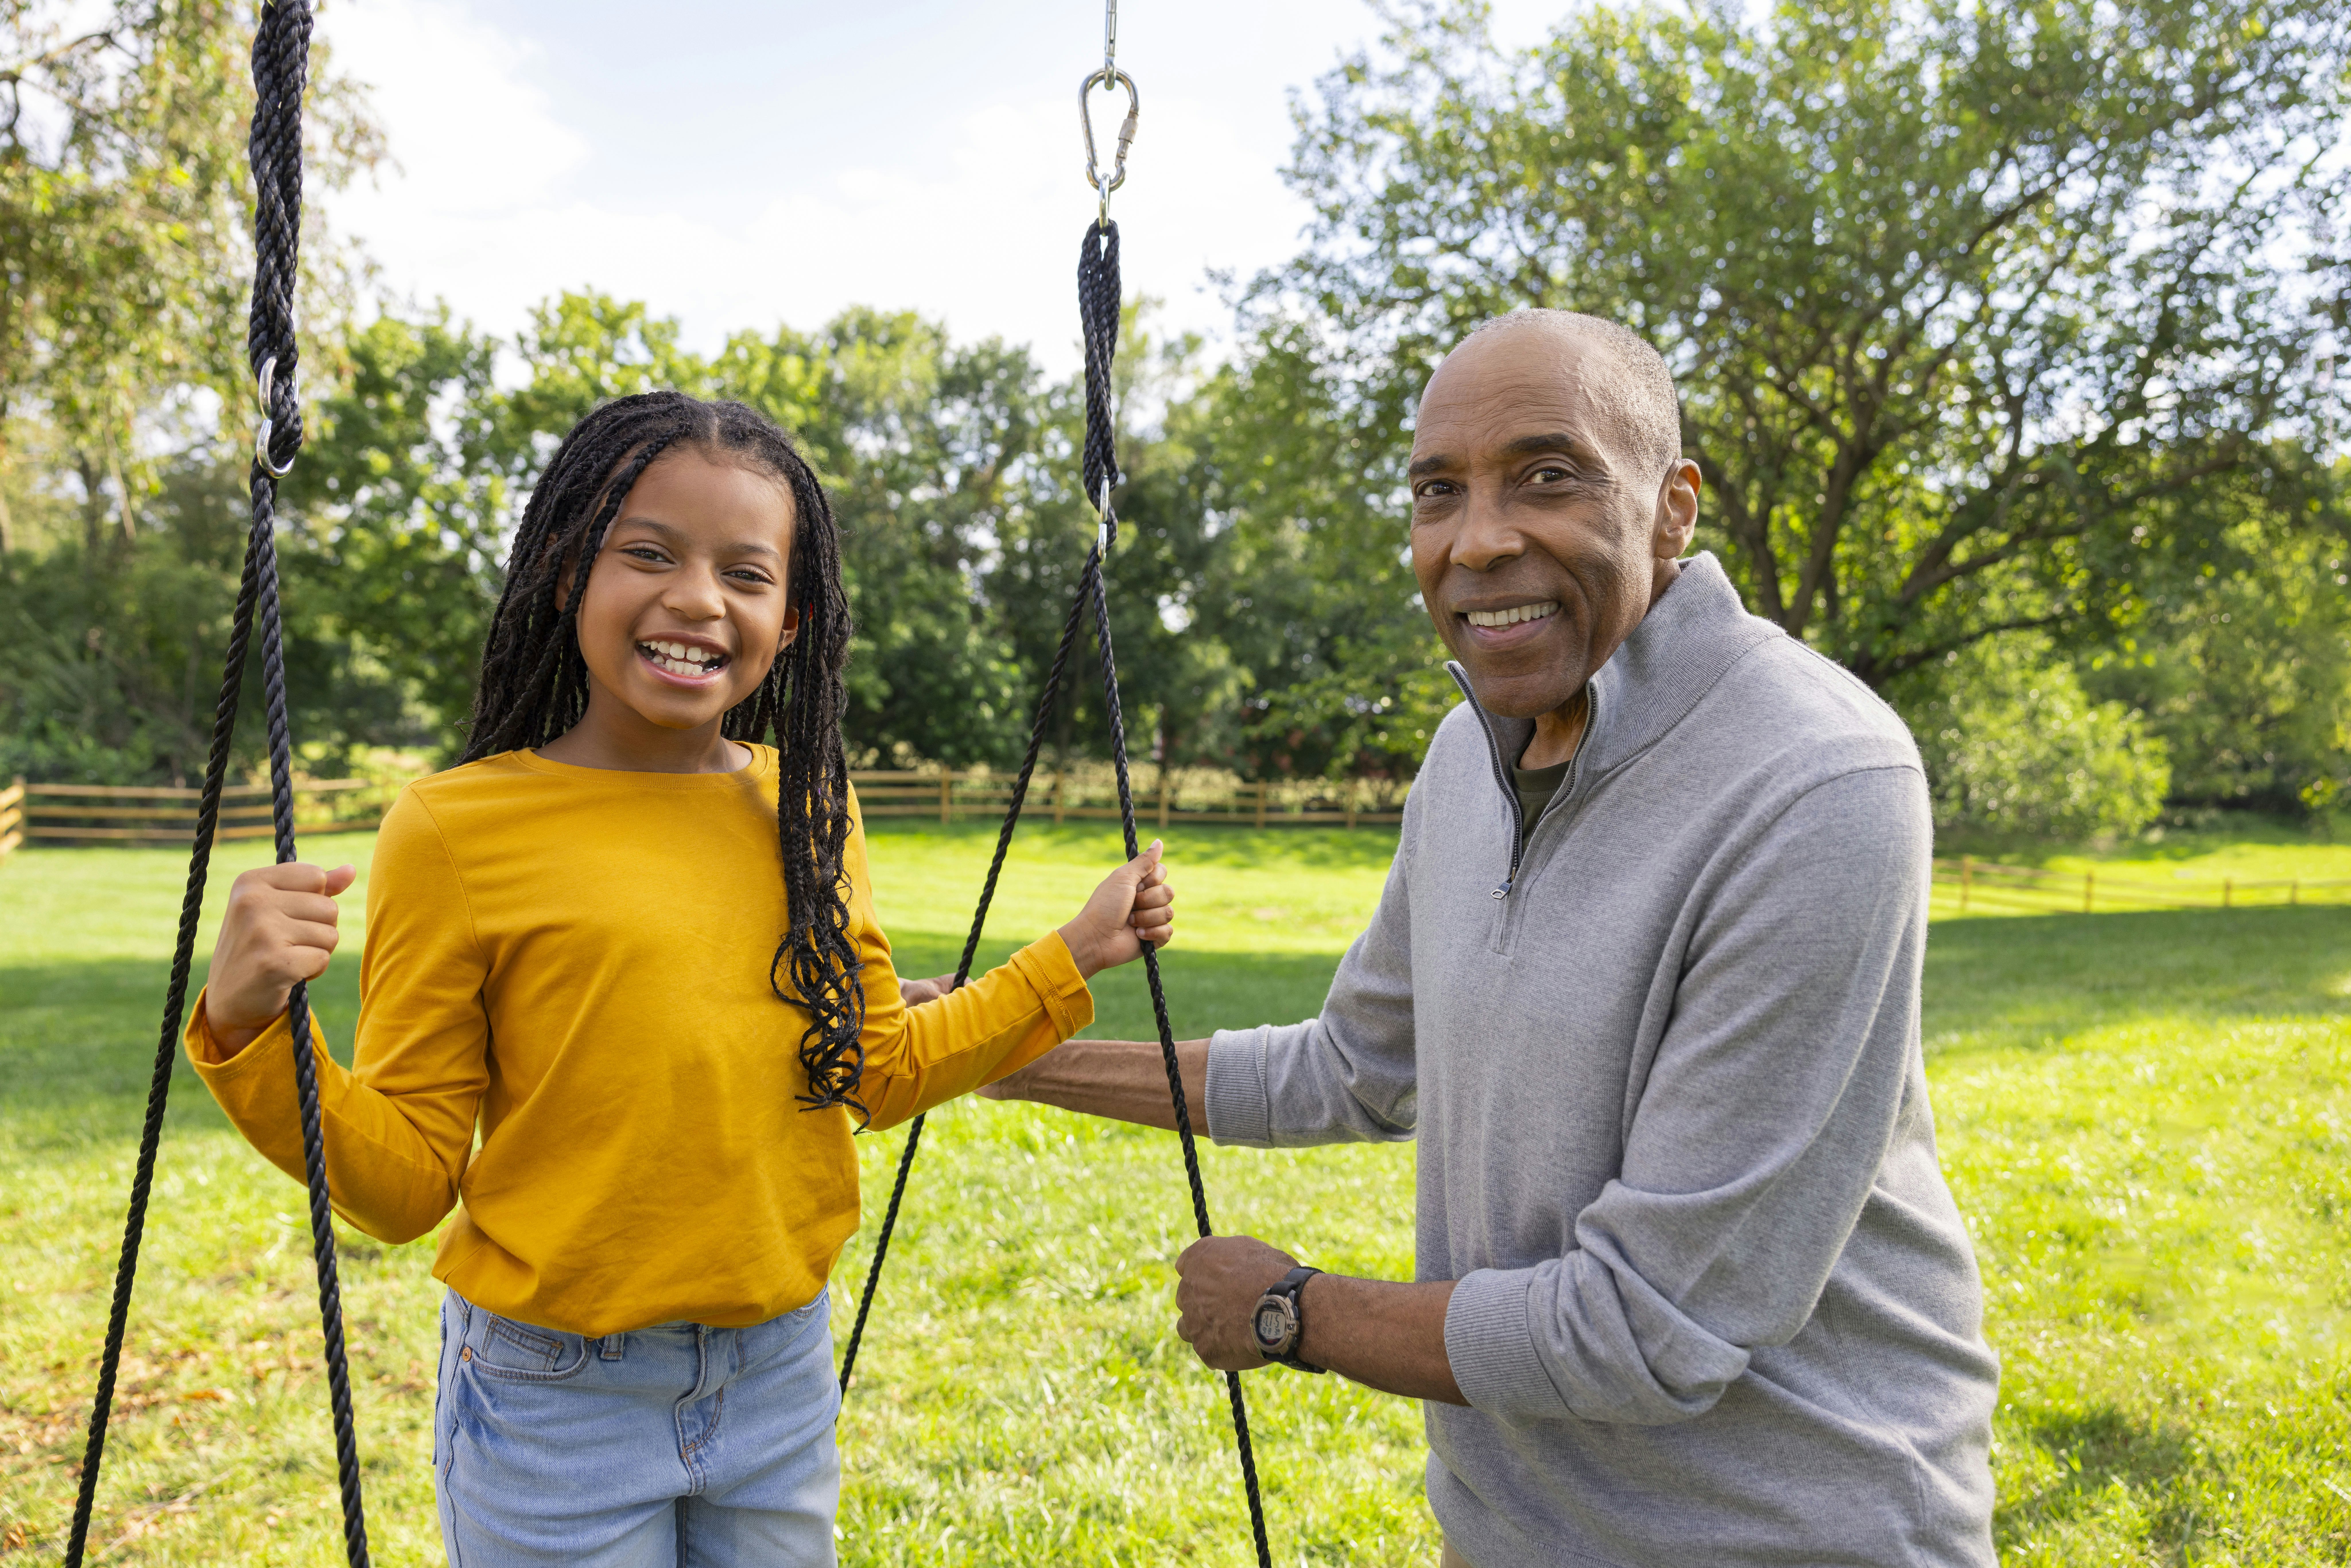 A grandfather and granddaughter smile at the camera while he pushes her on a swing